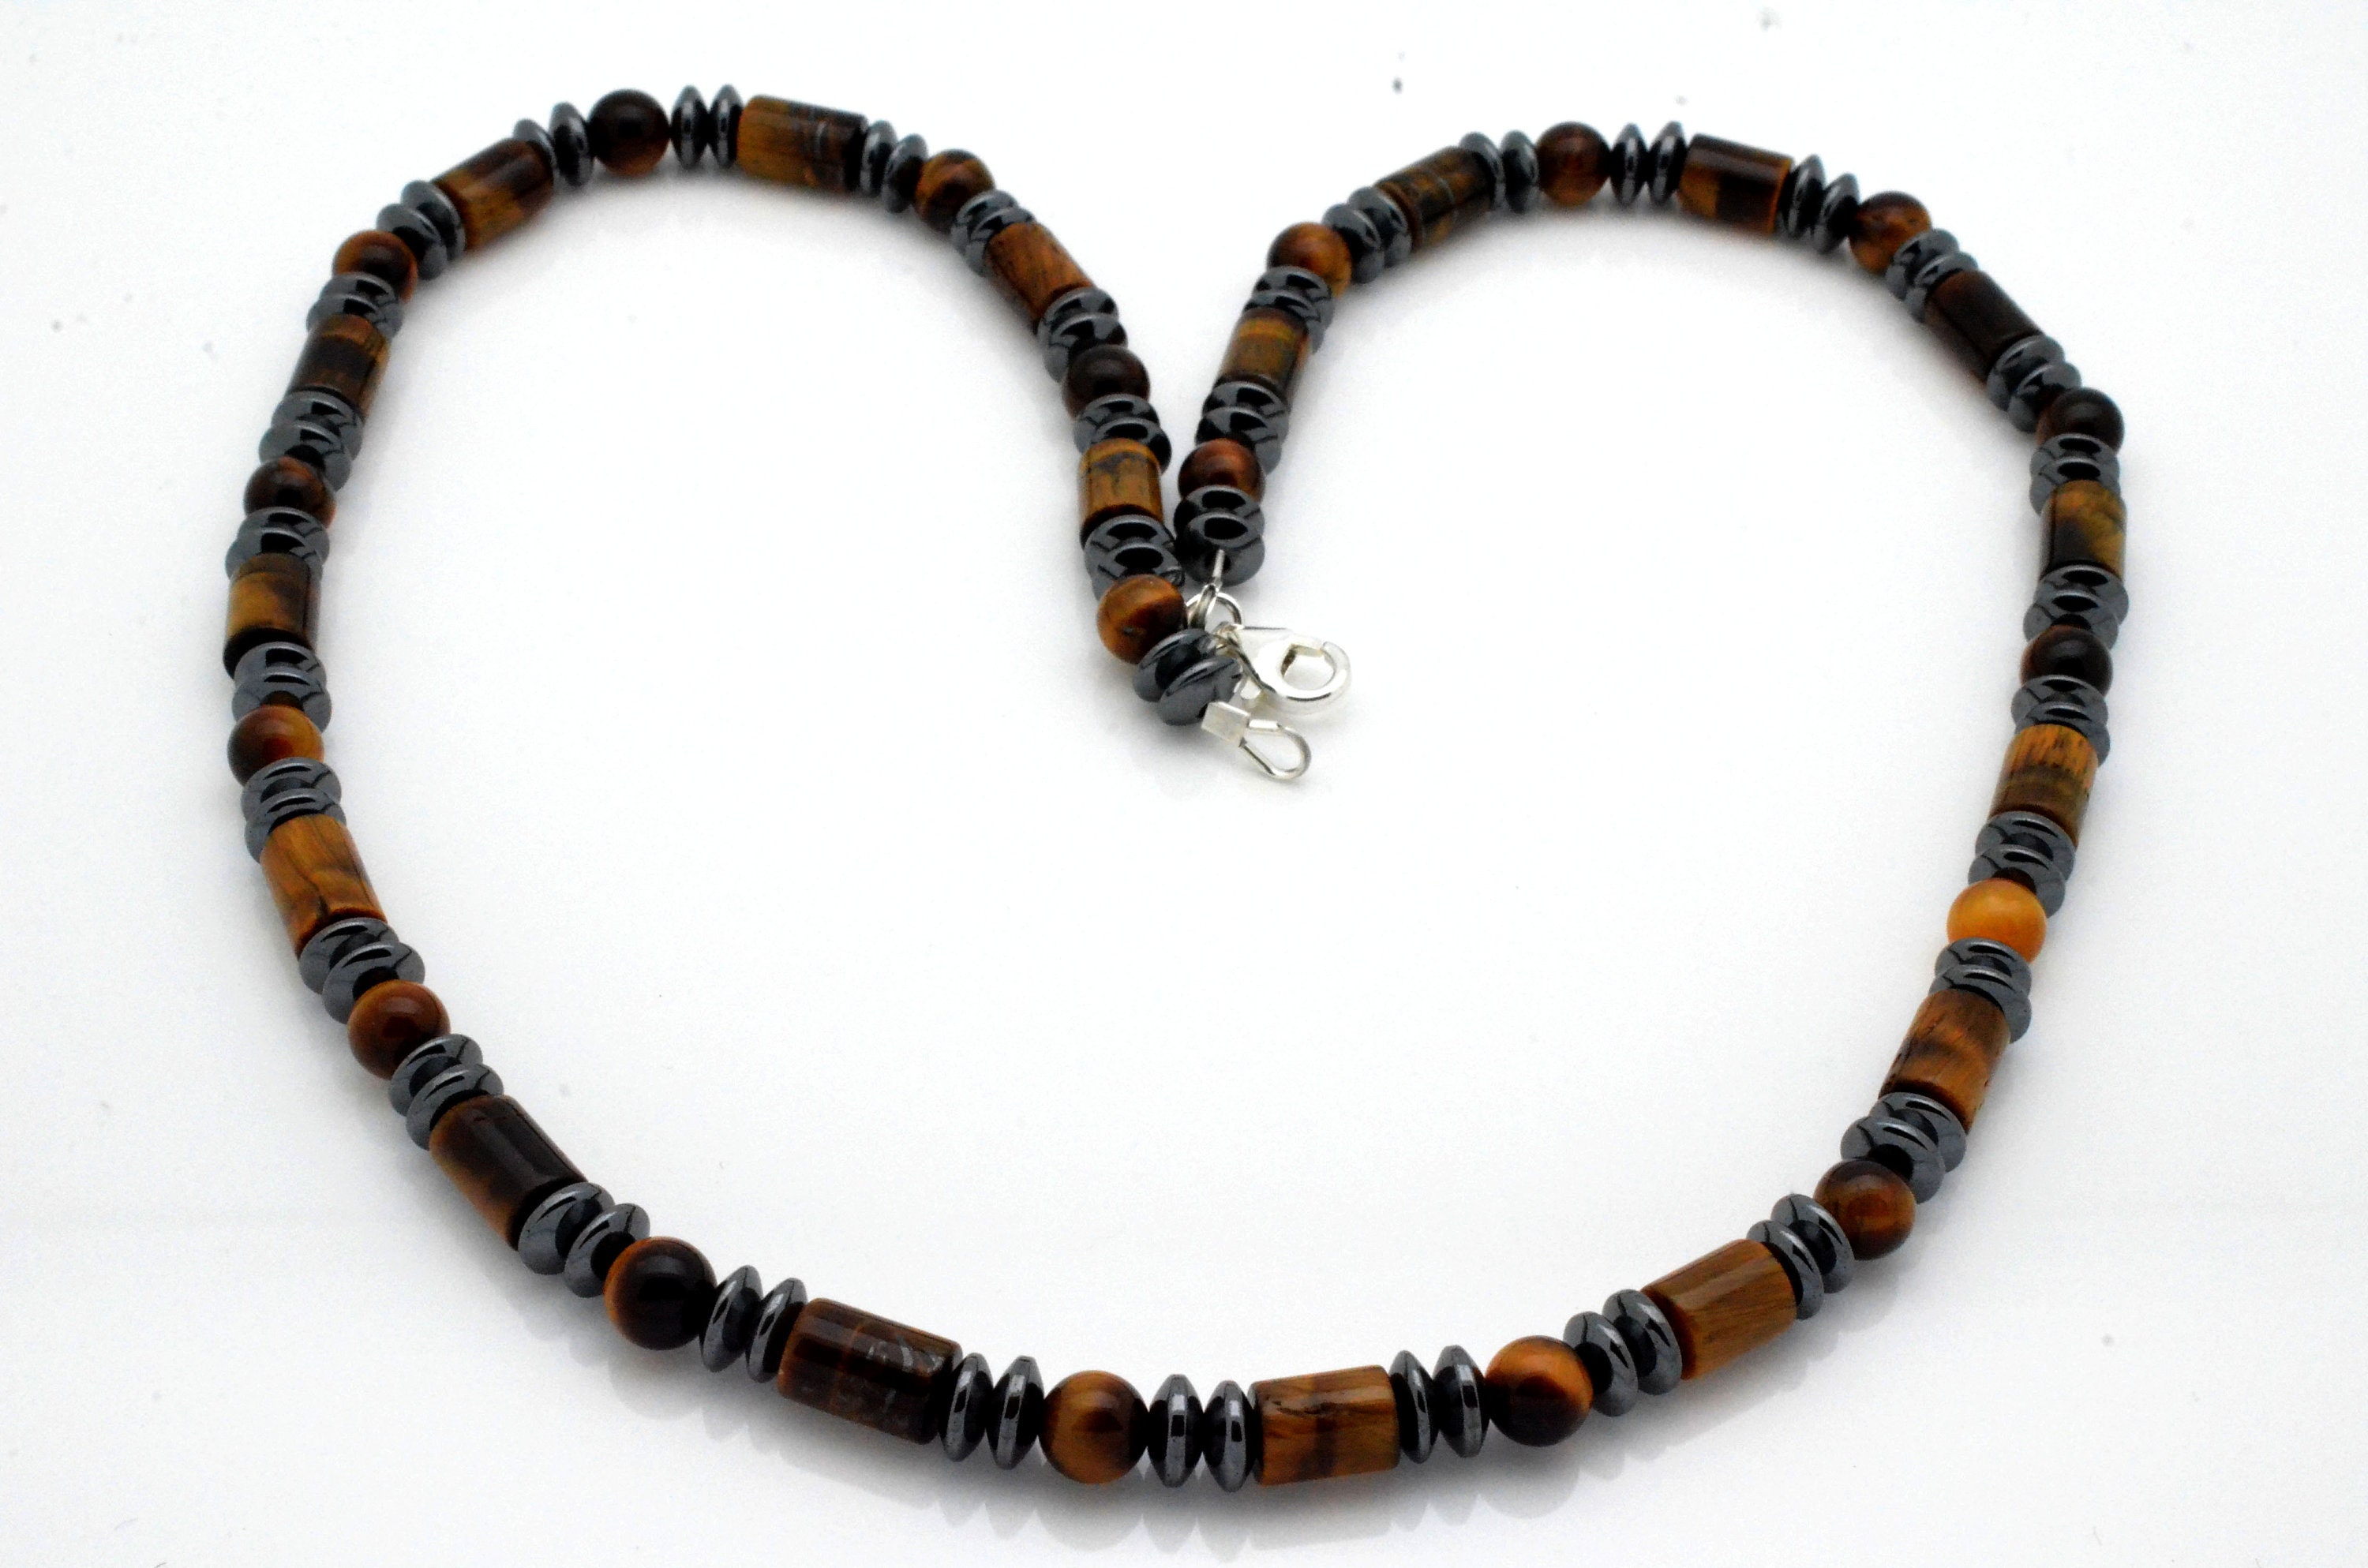 Men's Beaded Necklace Tiger's Eye and Hematite Necklace Mixed Stone and Sterling Silver Beads Necklace 